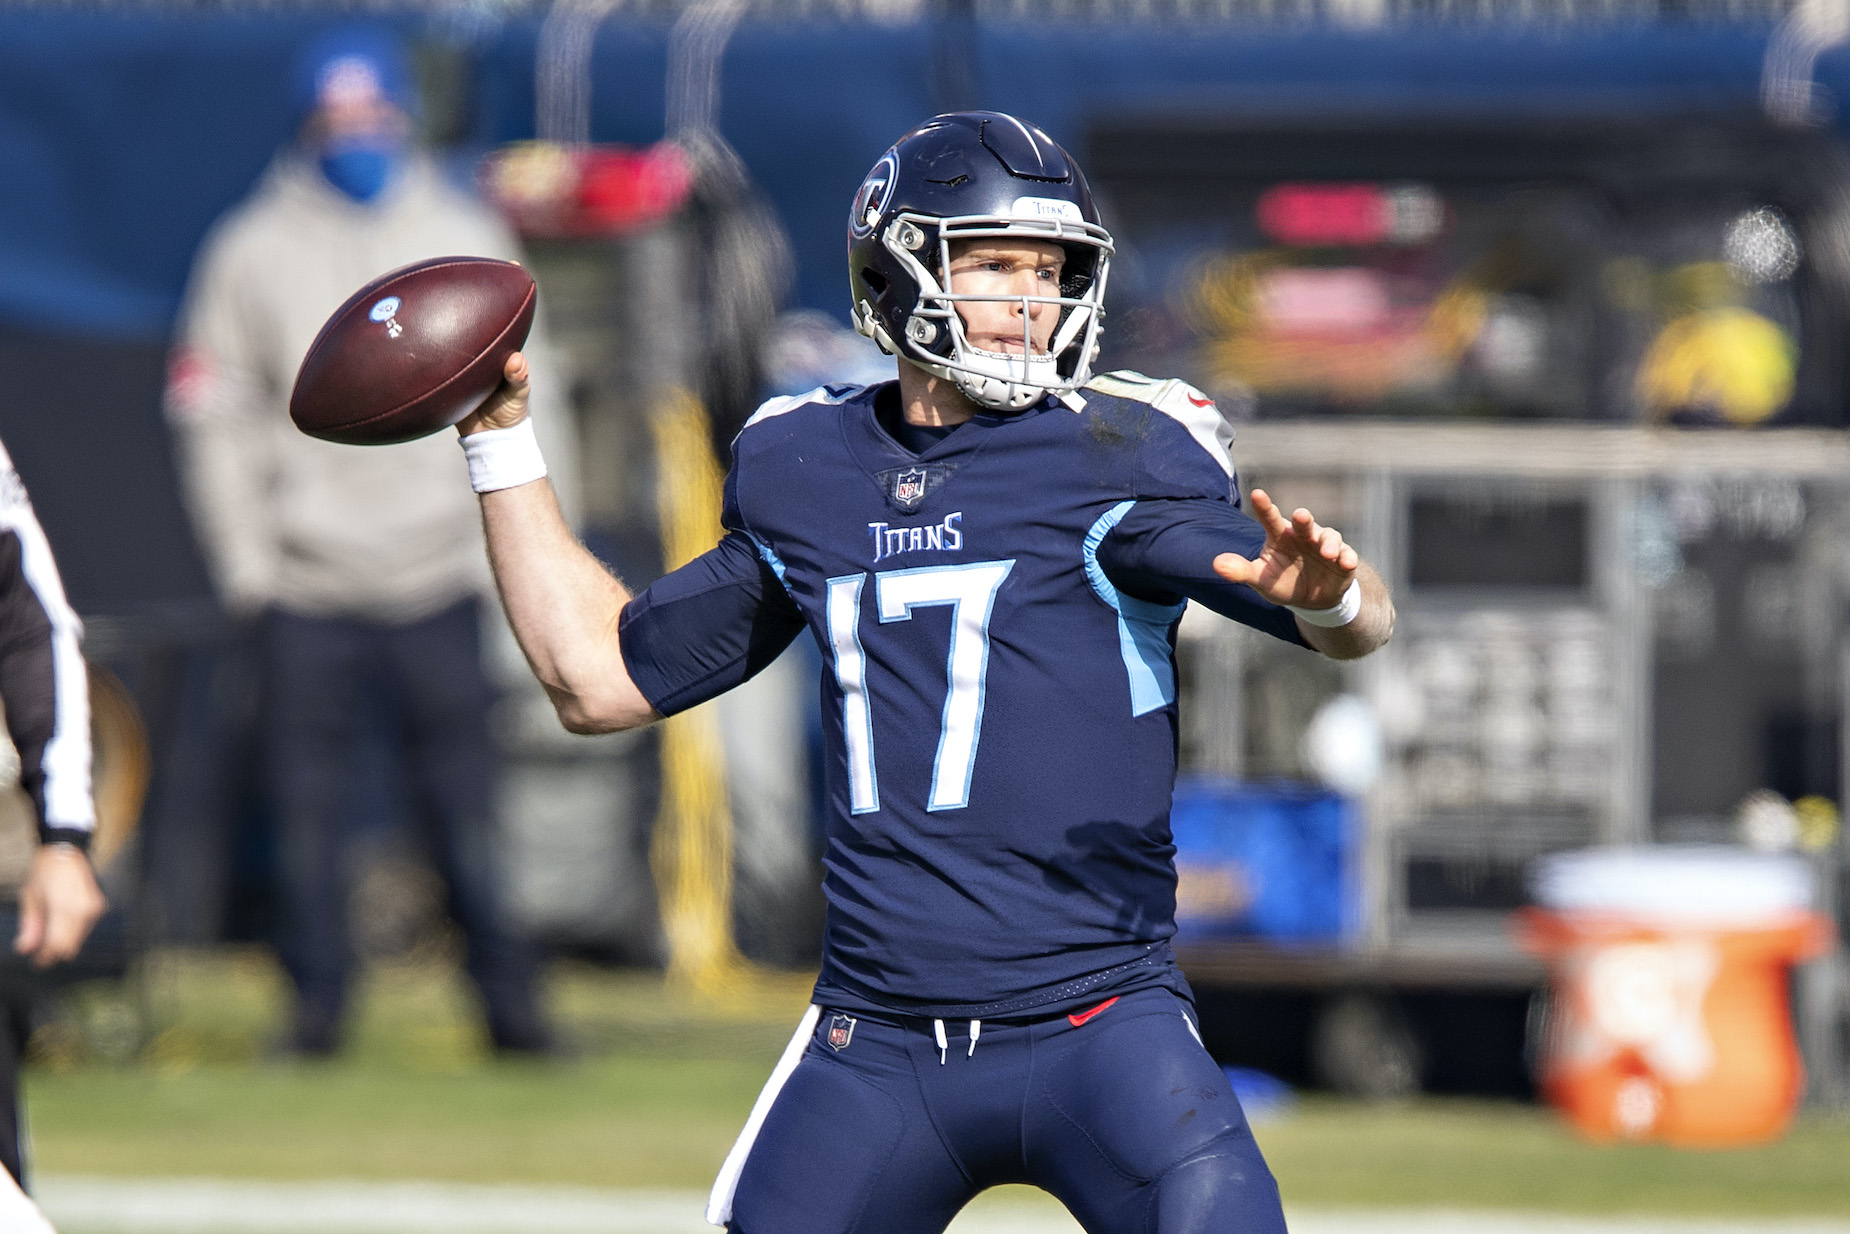 Ryan Tannehill throws a pass during the Tennessee Titans' 2020 NFL playoff defeat.